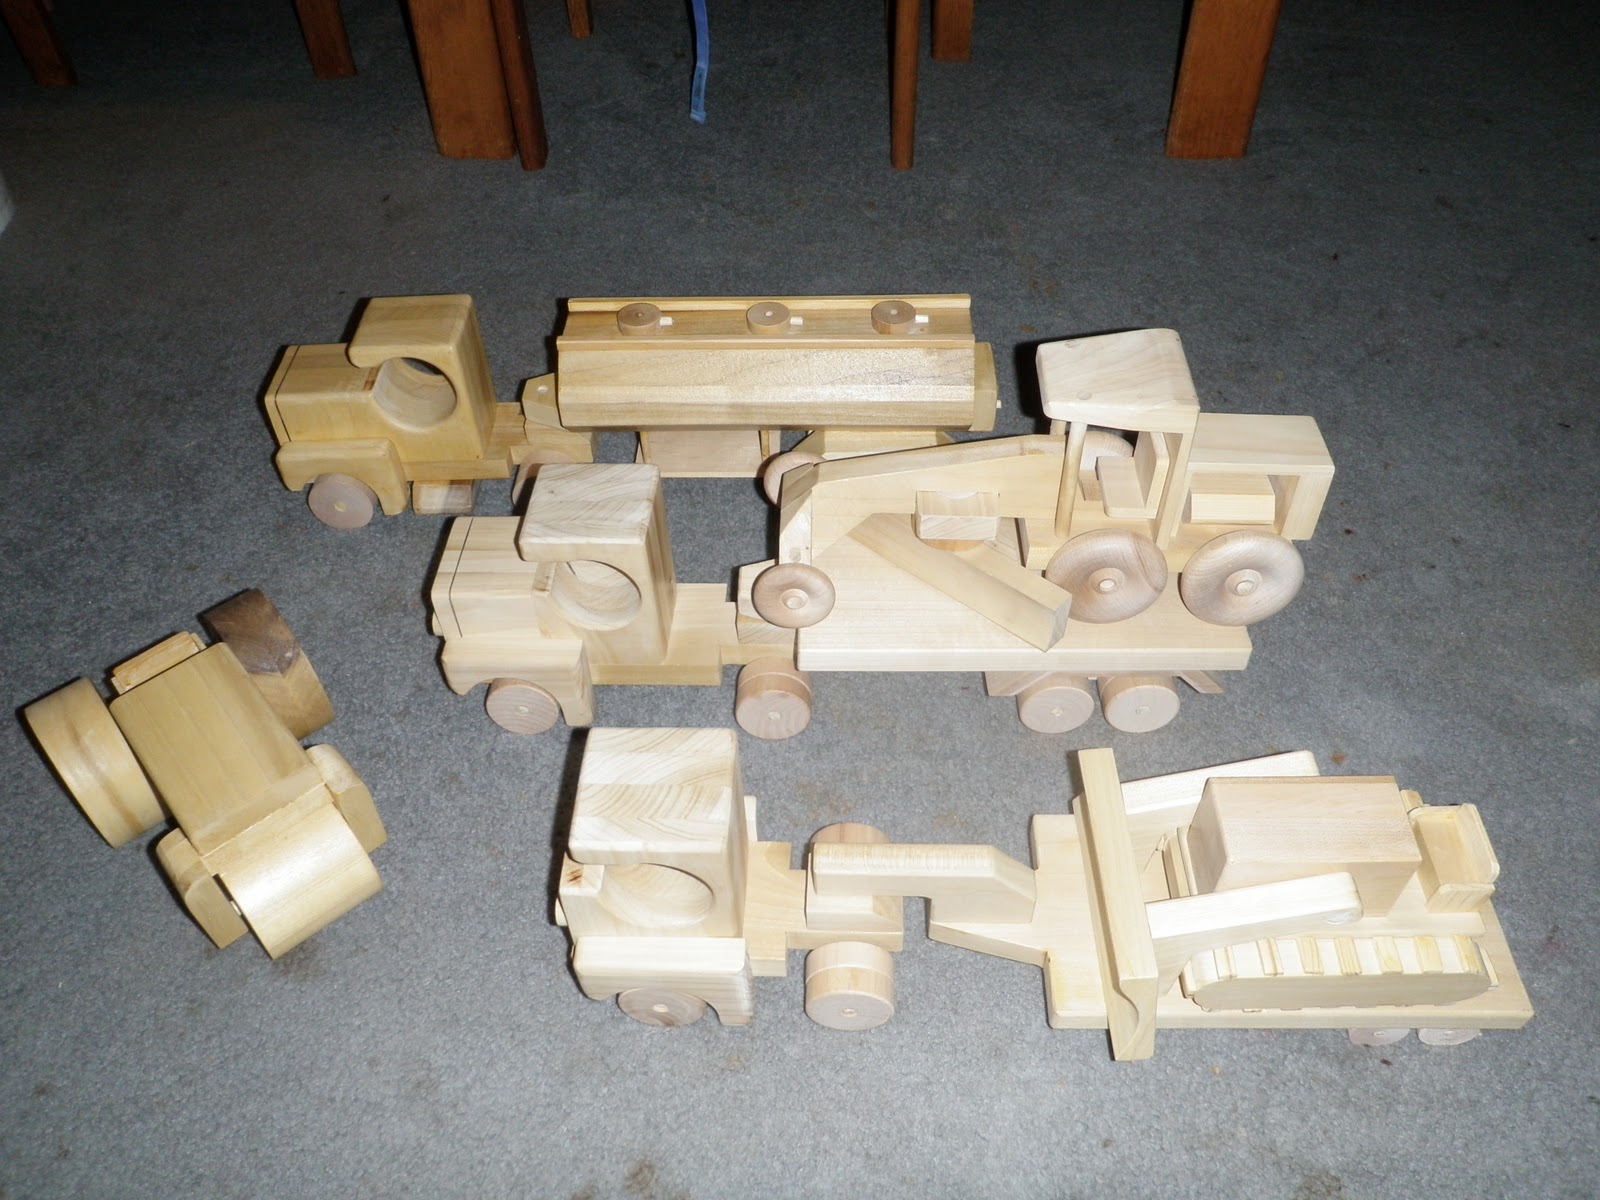 Plans to Build Wooden Toy Trucks